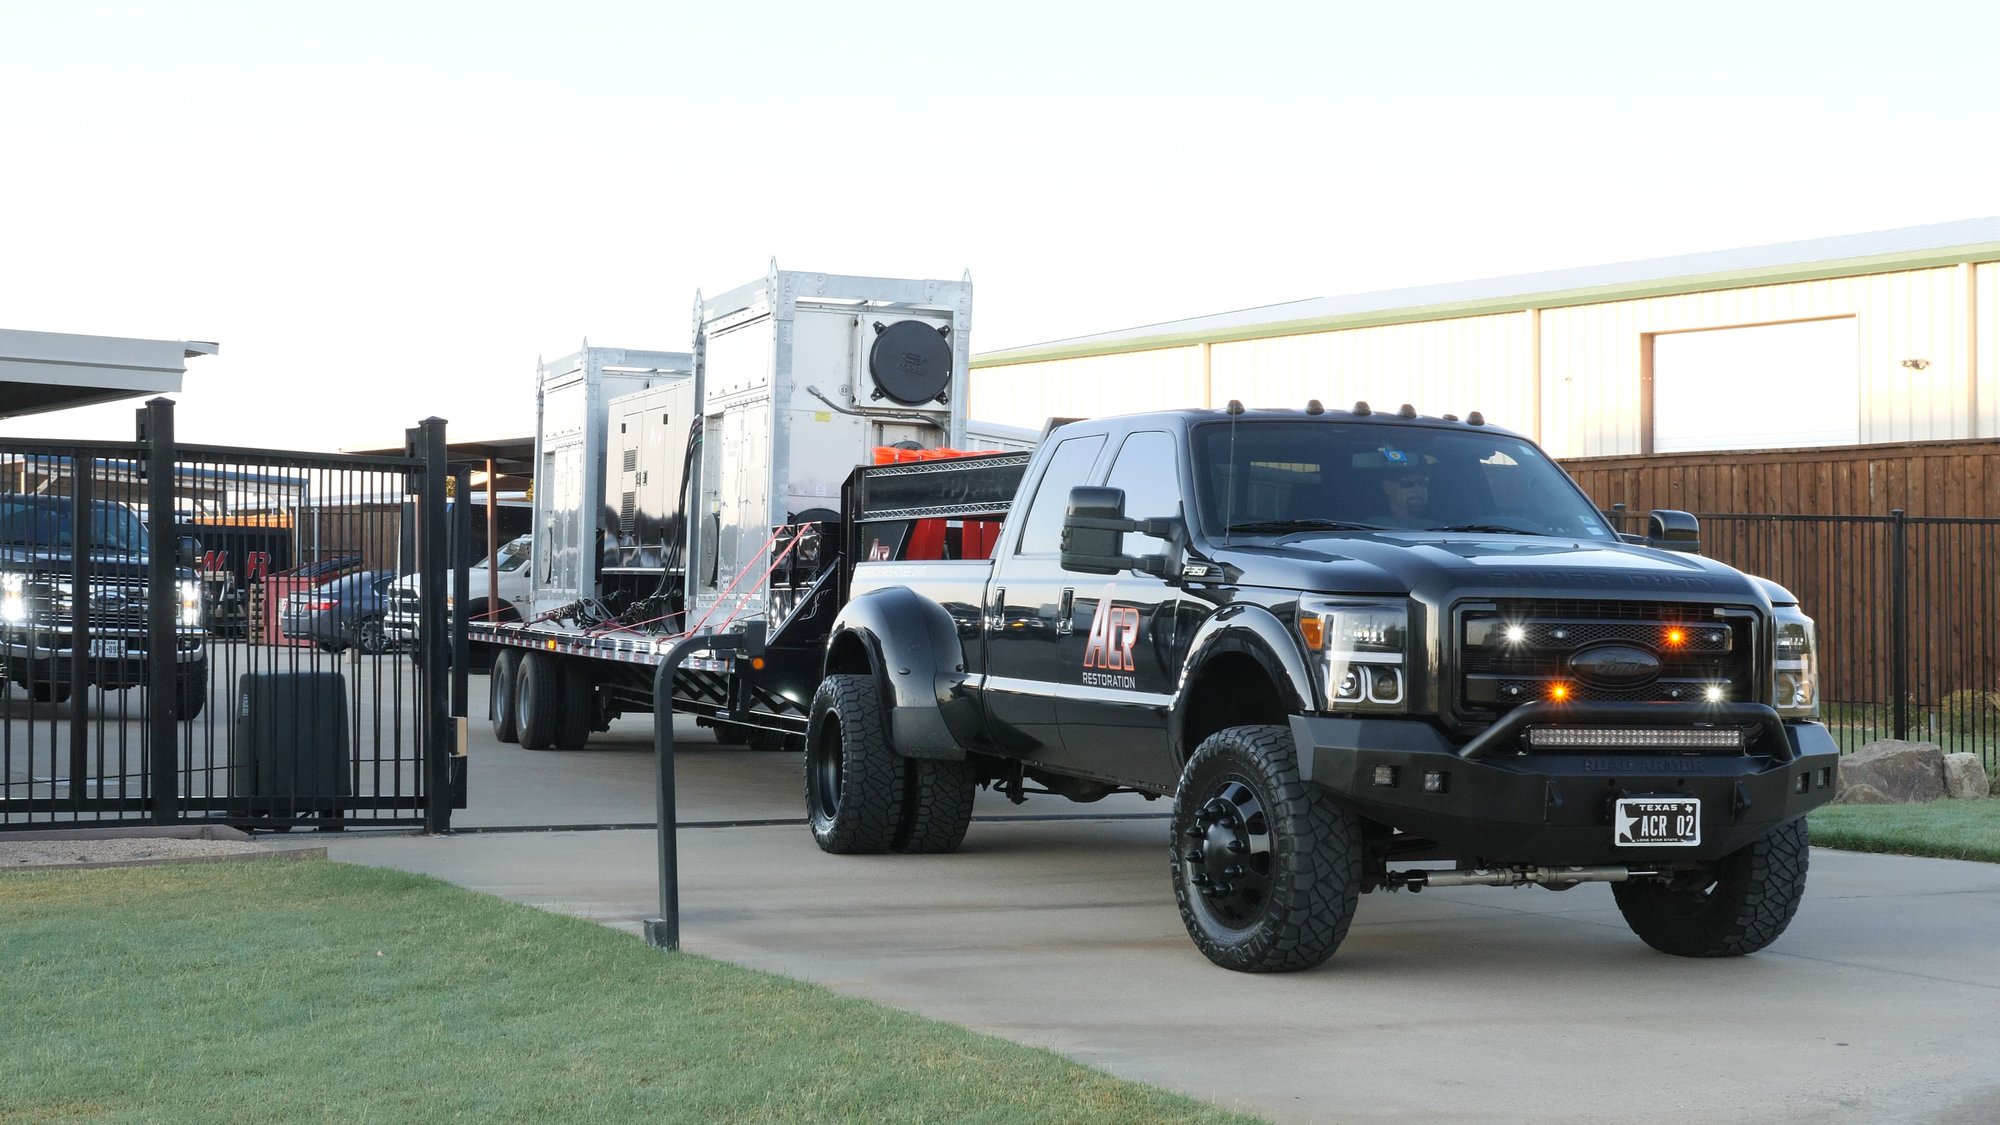 A large ACR truck pulling a trailer full of supplies